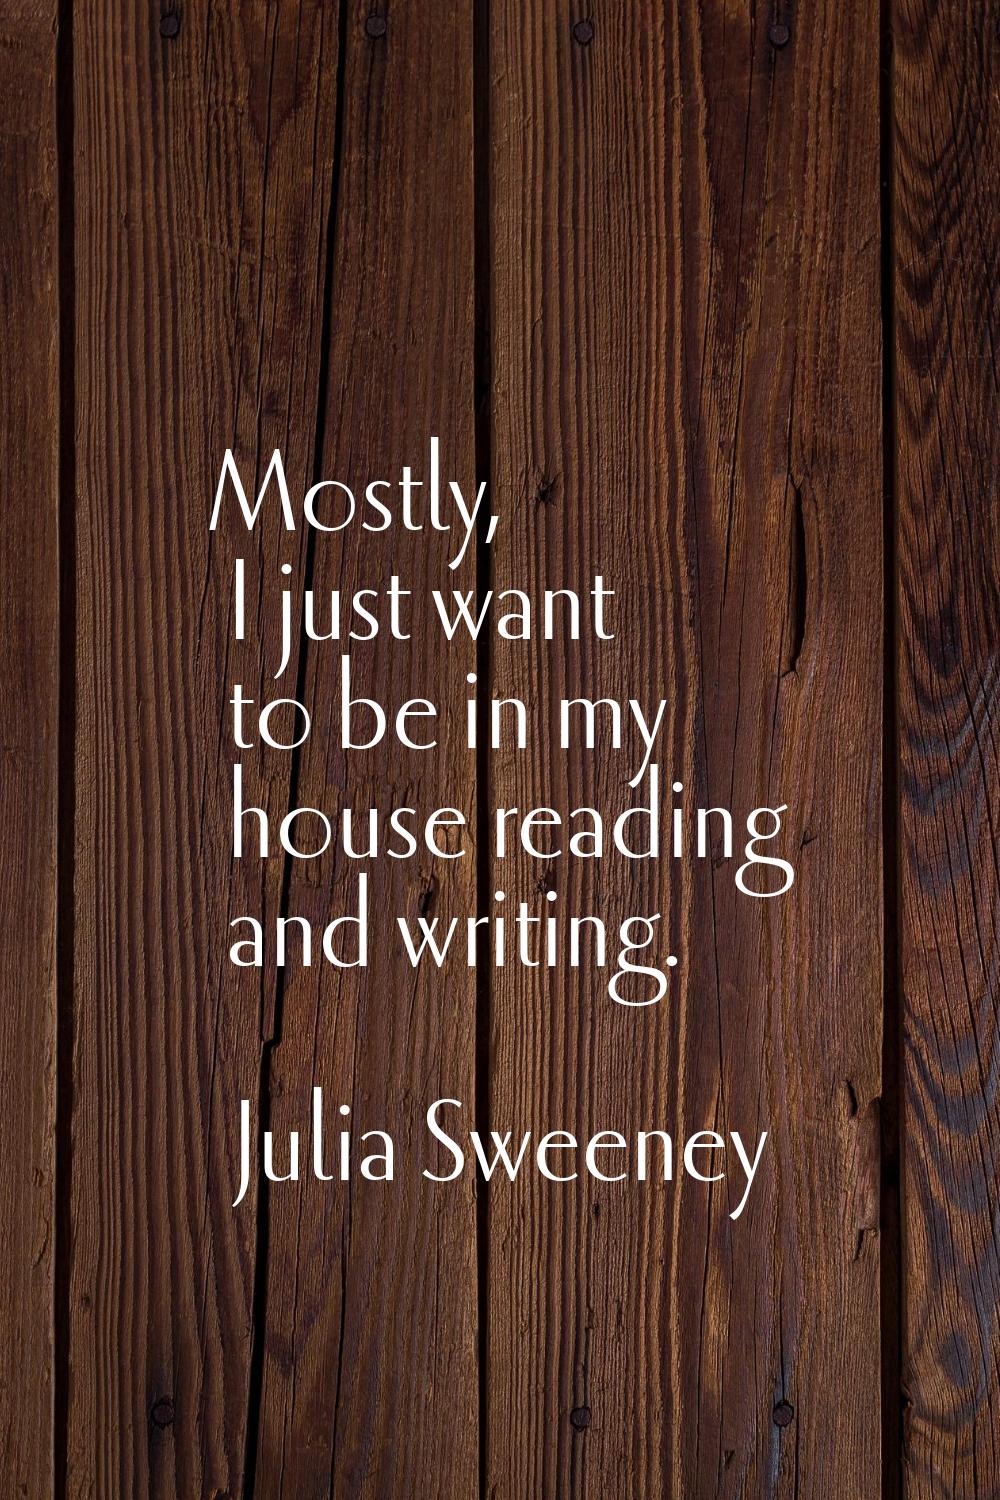 Mostly, I just want to be in my house reading and writing.